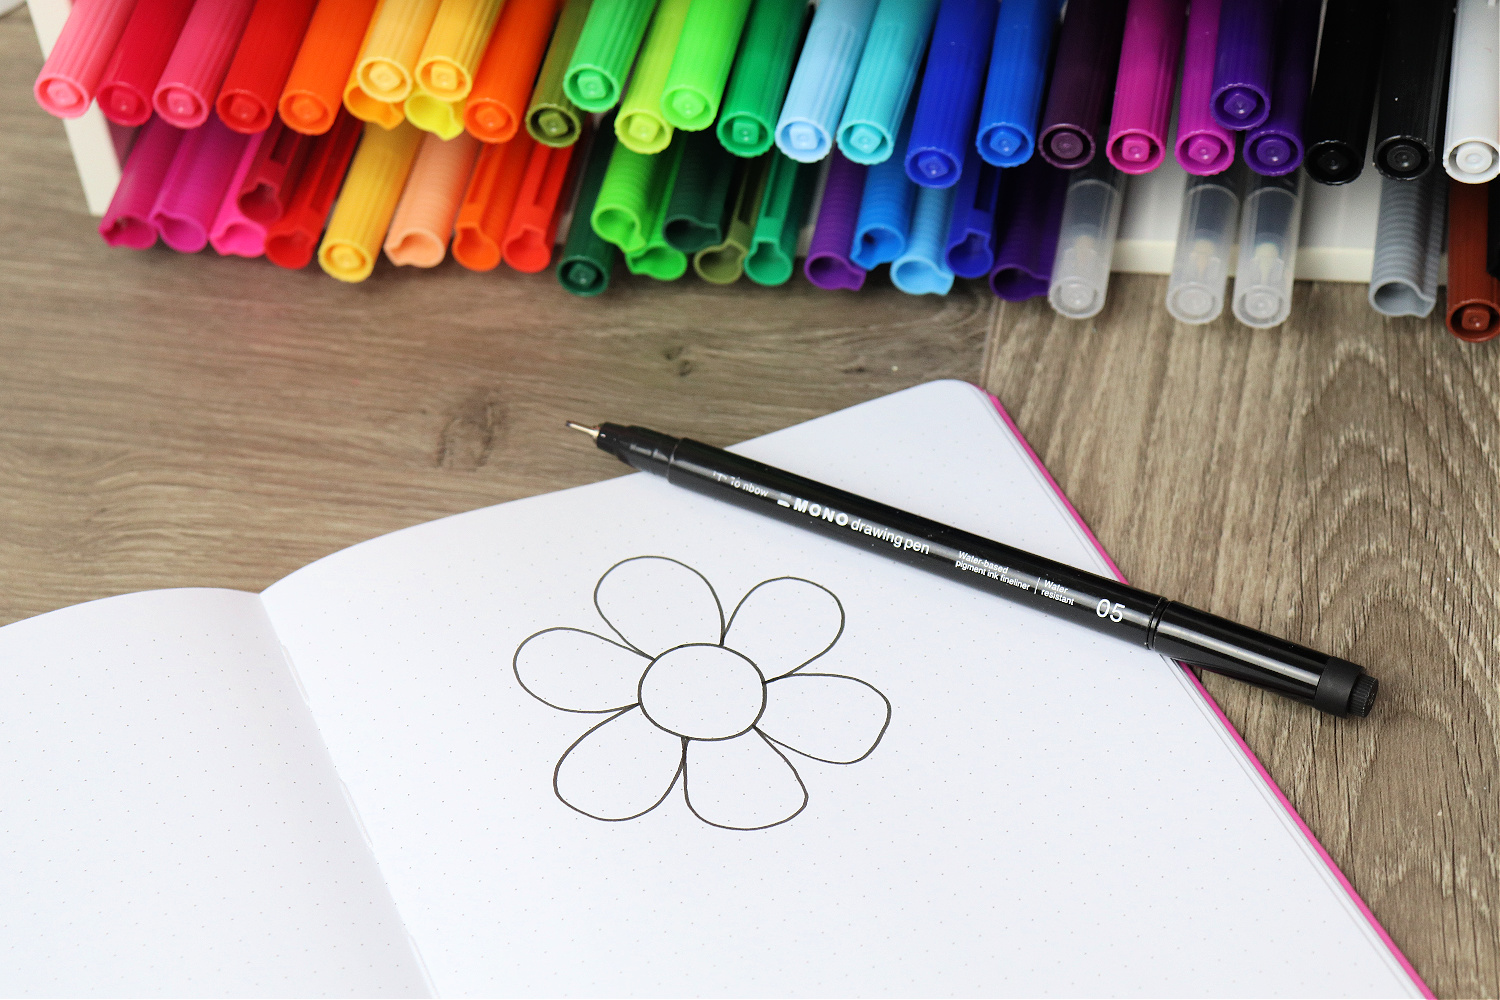 Image contains an open sketchbook sitting on a wooden desk in front of a container filled with multicolored markers. A simple flower with a round center and six petals is drawn on the page, and a MONO Drawing Pen 05 sits on top.